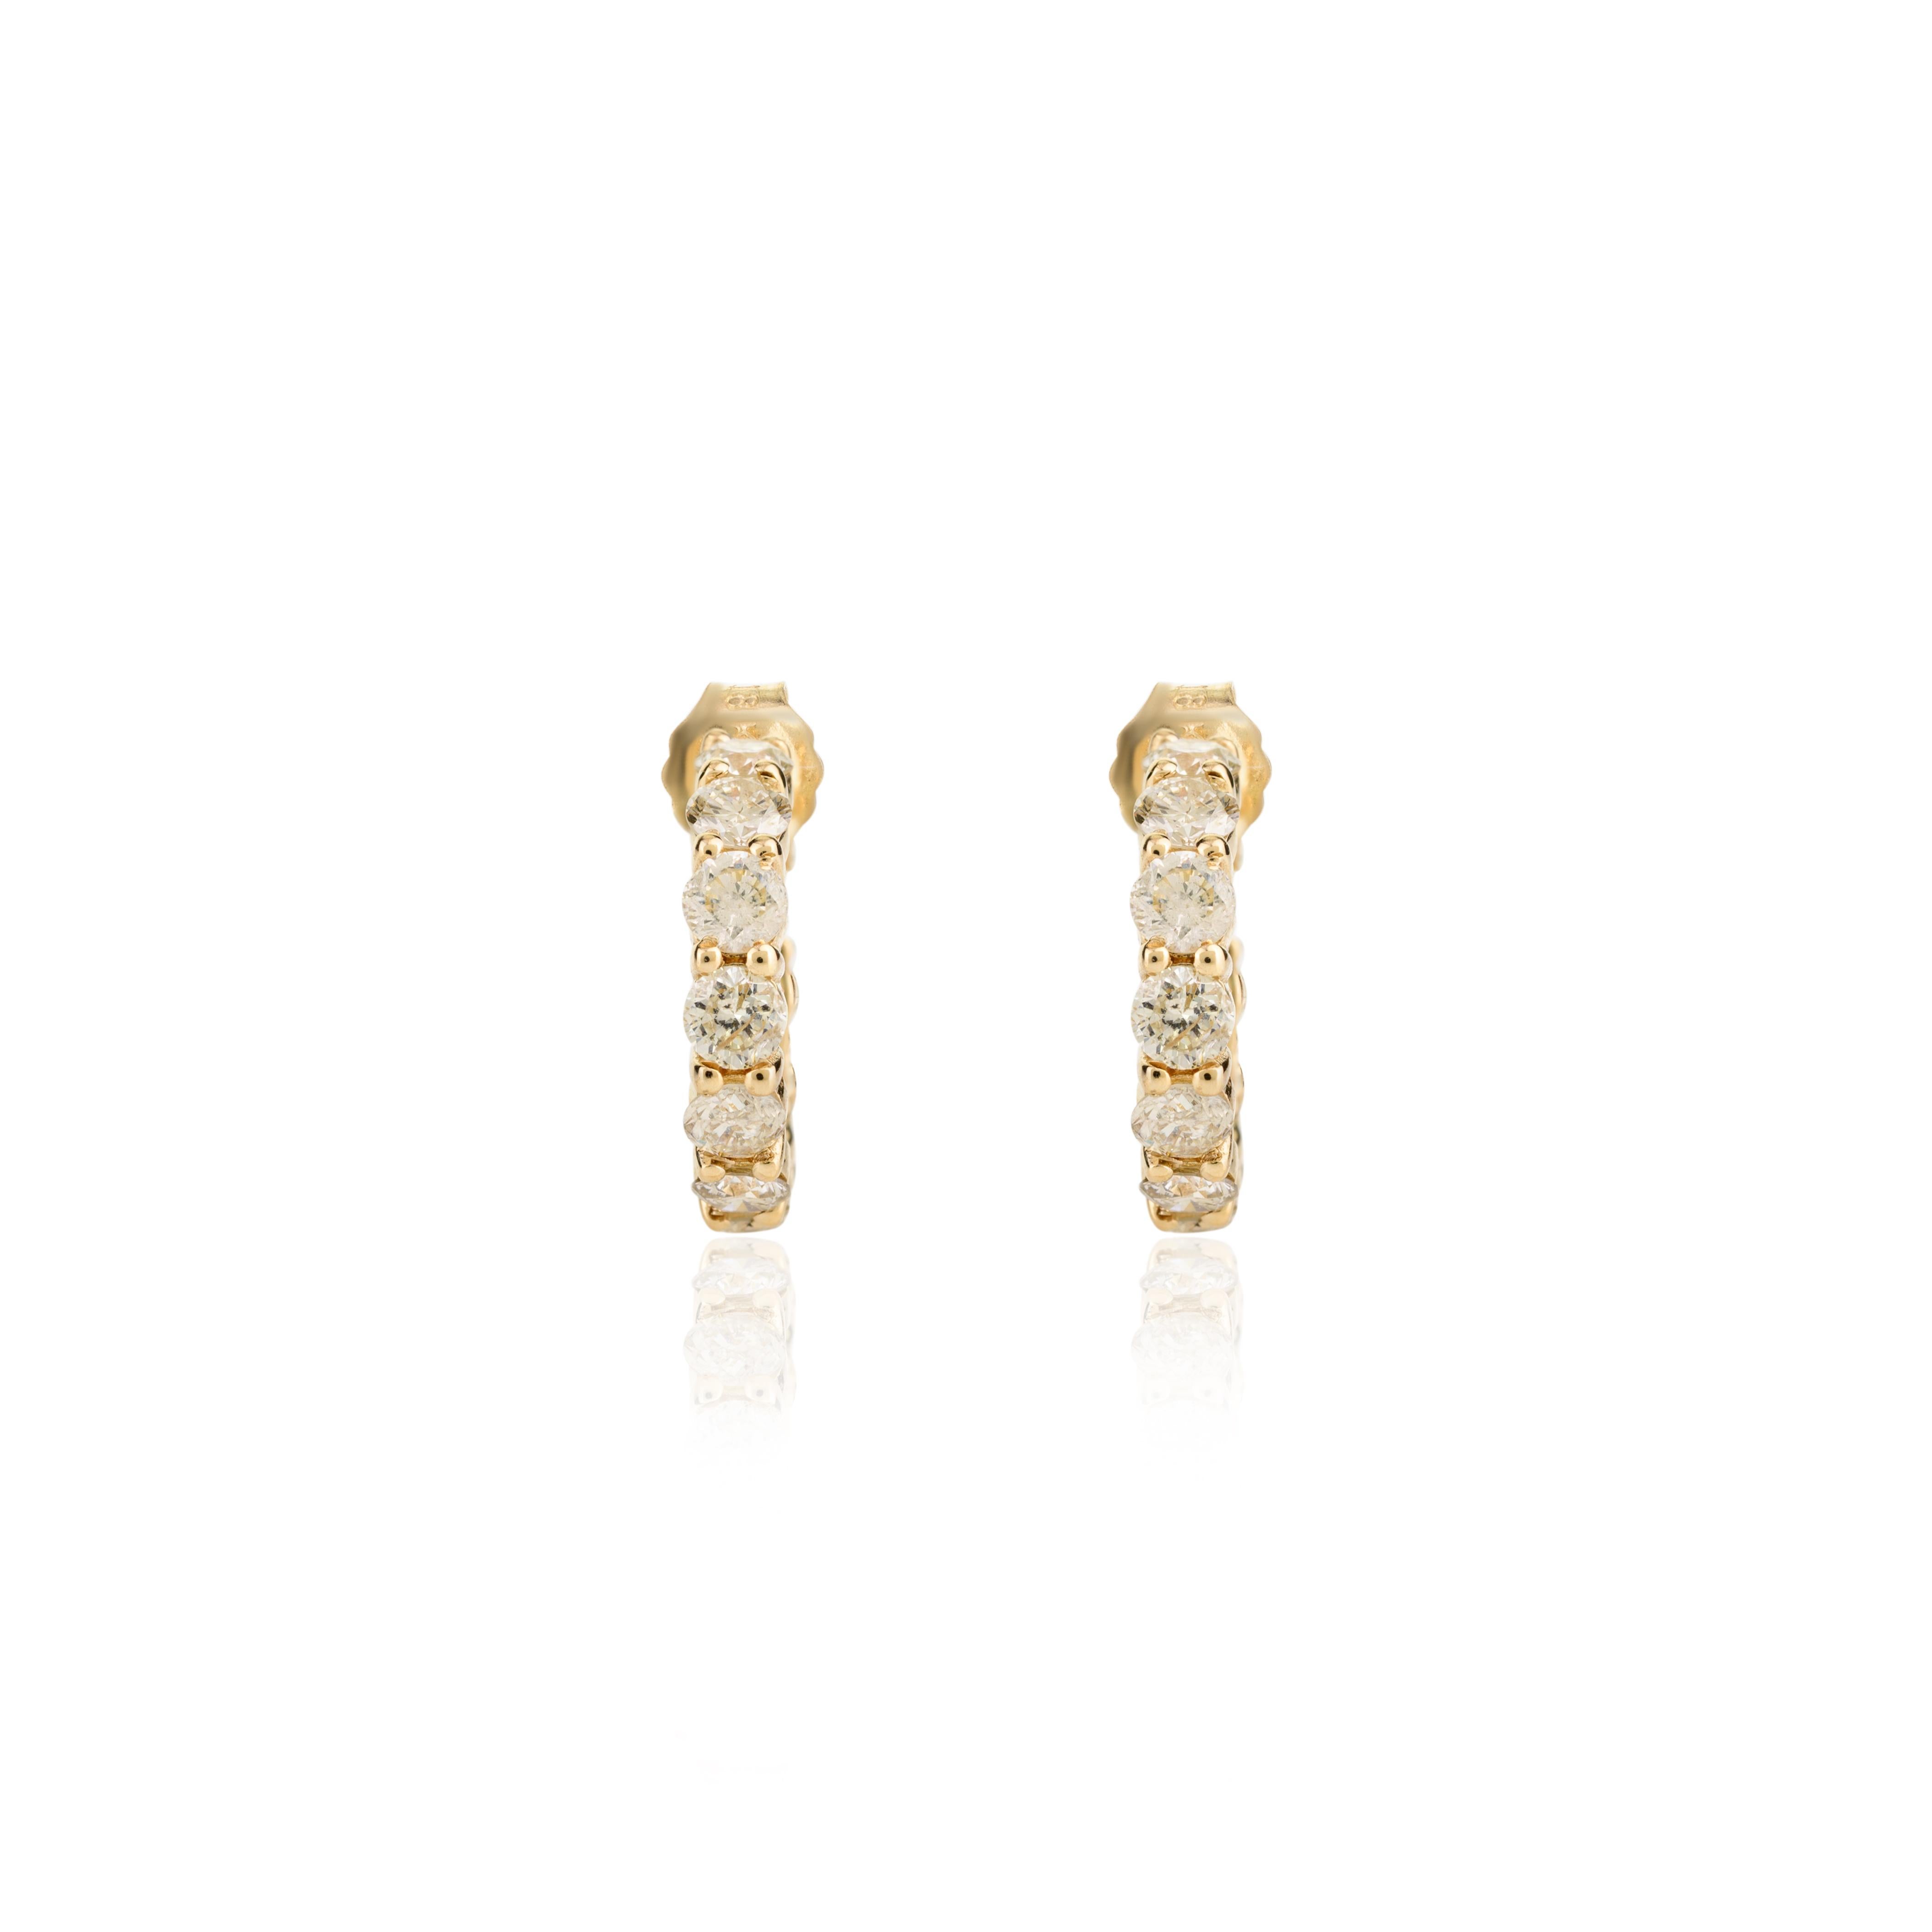 Women's Dainty Everyday Diamond Hoop Earrings in 18k Yellow Gold Perfect Gift for Her For Sale